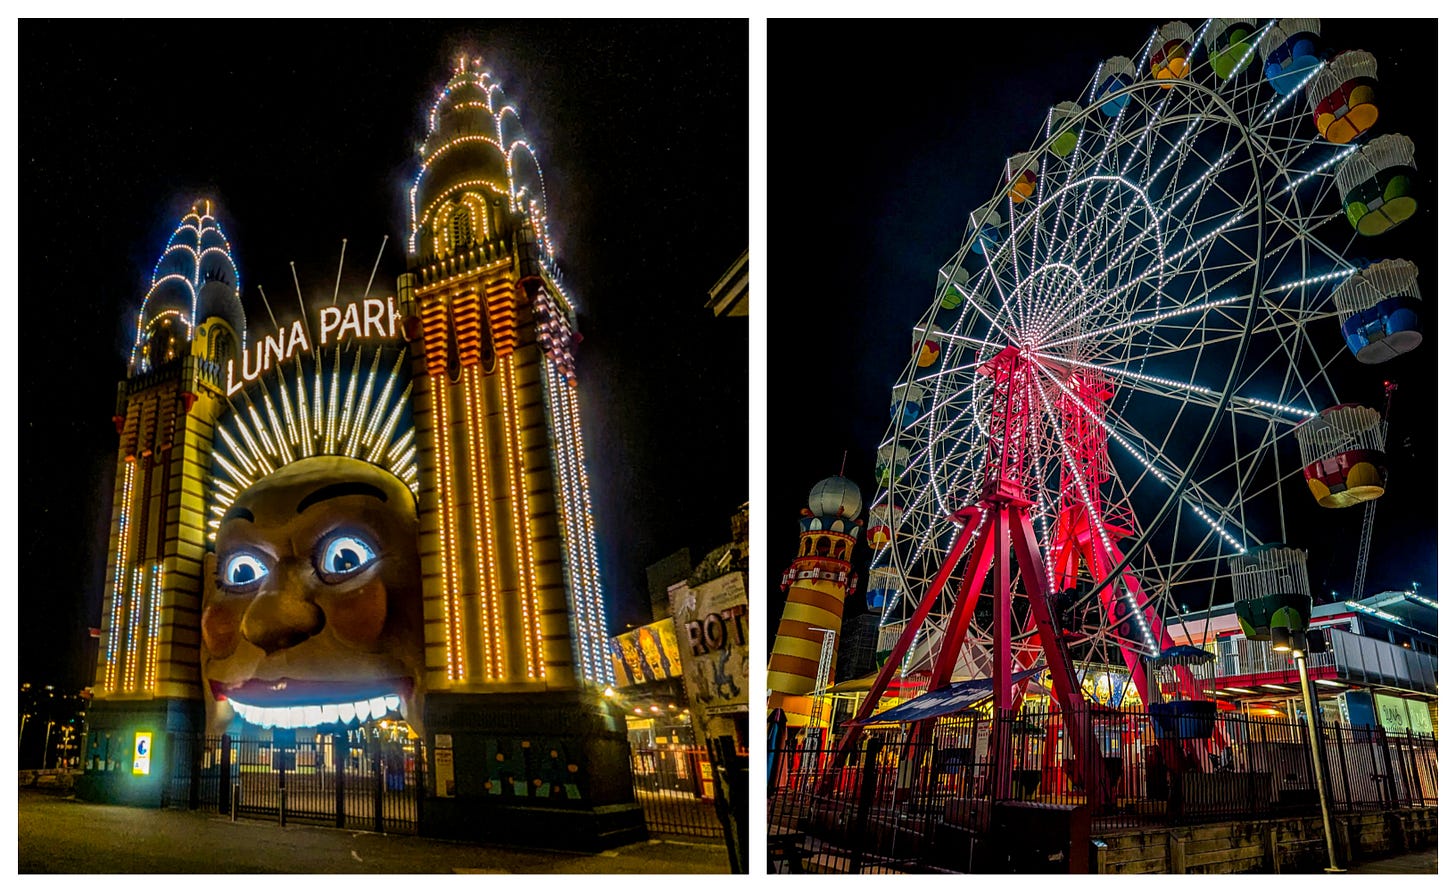 Photo on left shows entrance to Luna Park through the smiling face lit up at night; photo on the right shows the ferris wheel lit up at night. 